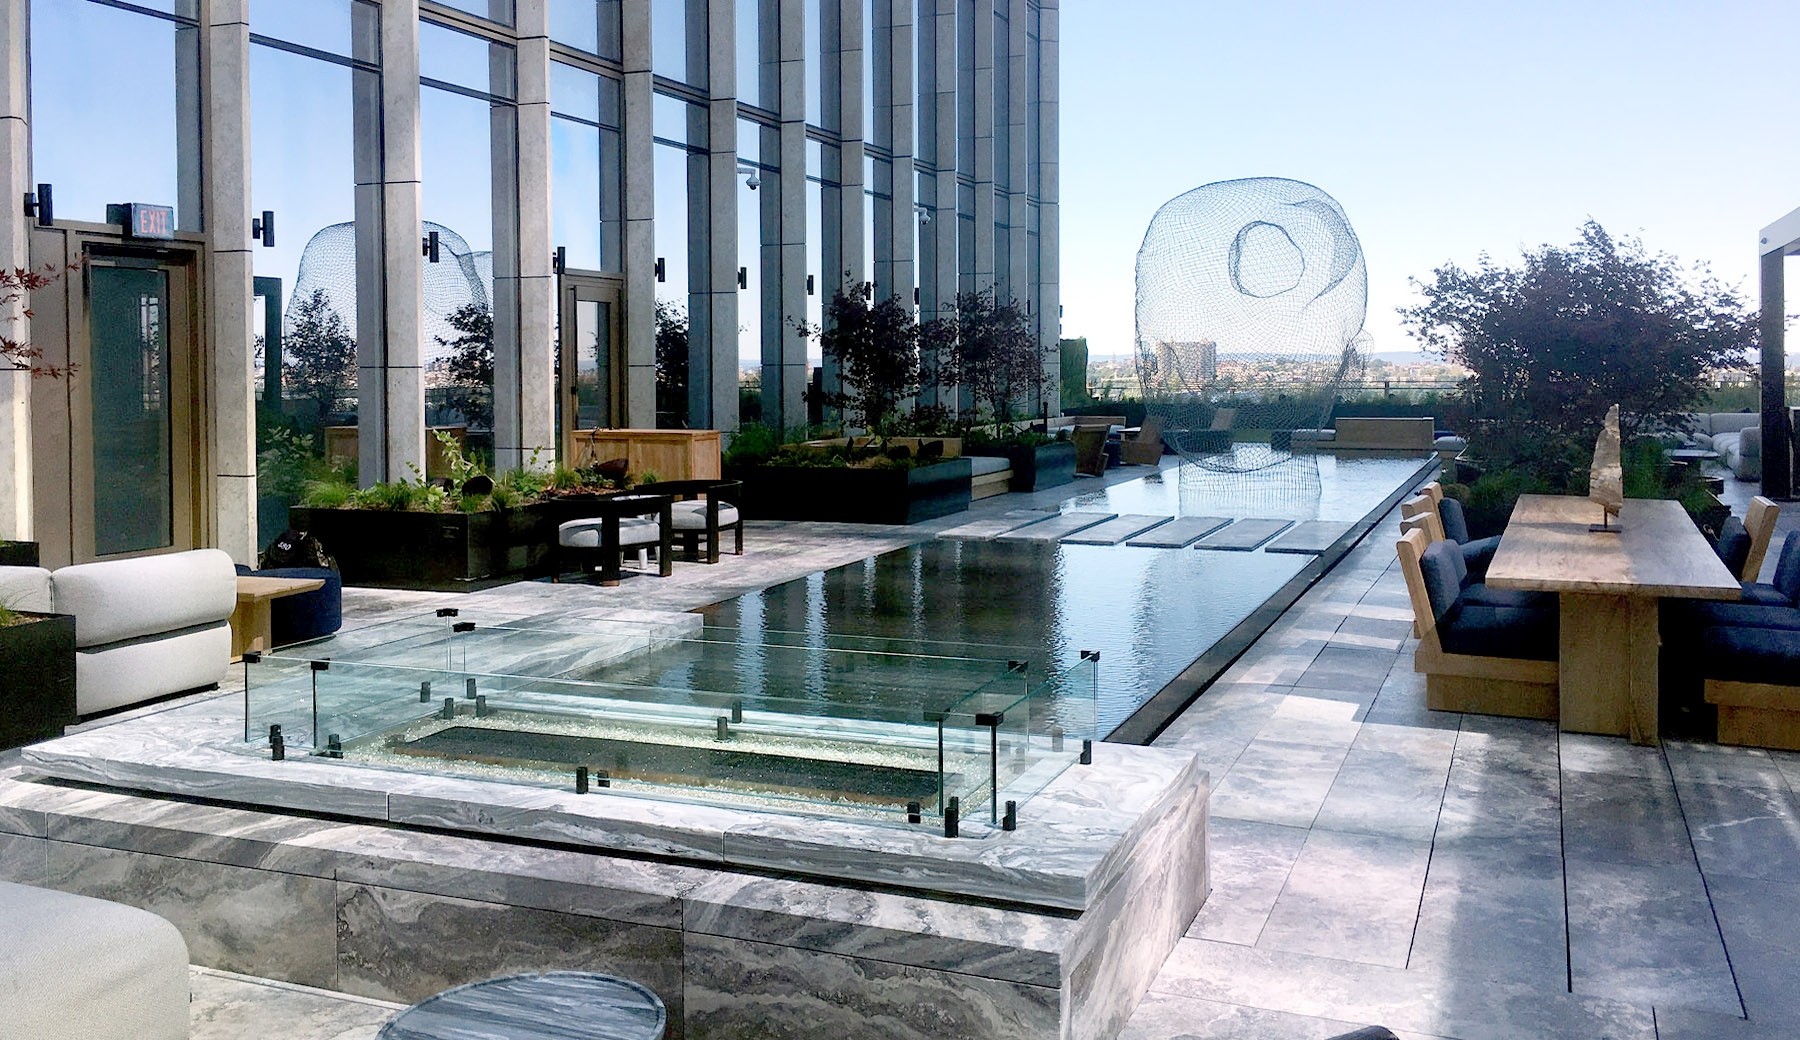 Beautiful still water reflecting pool with large transparent sculpture. Water constantly overflows and laminates to the sidewalls of the water feature creating a shimmering block of water.